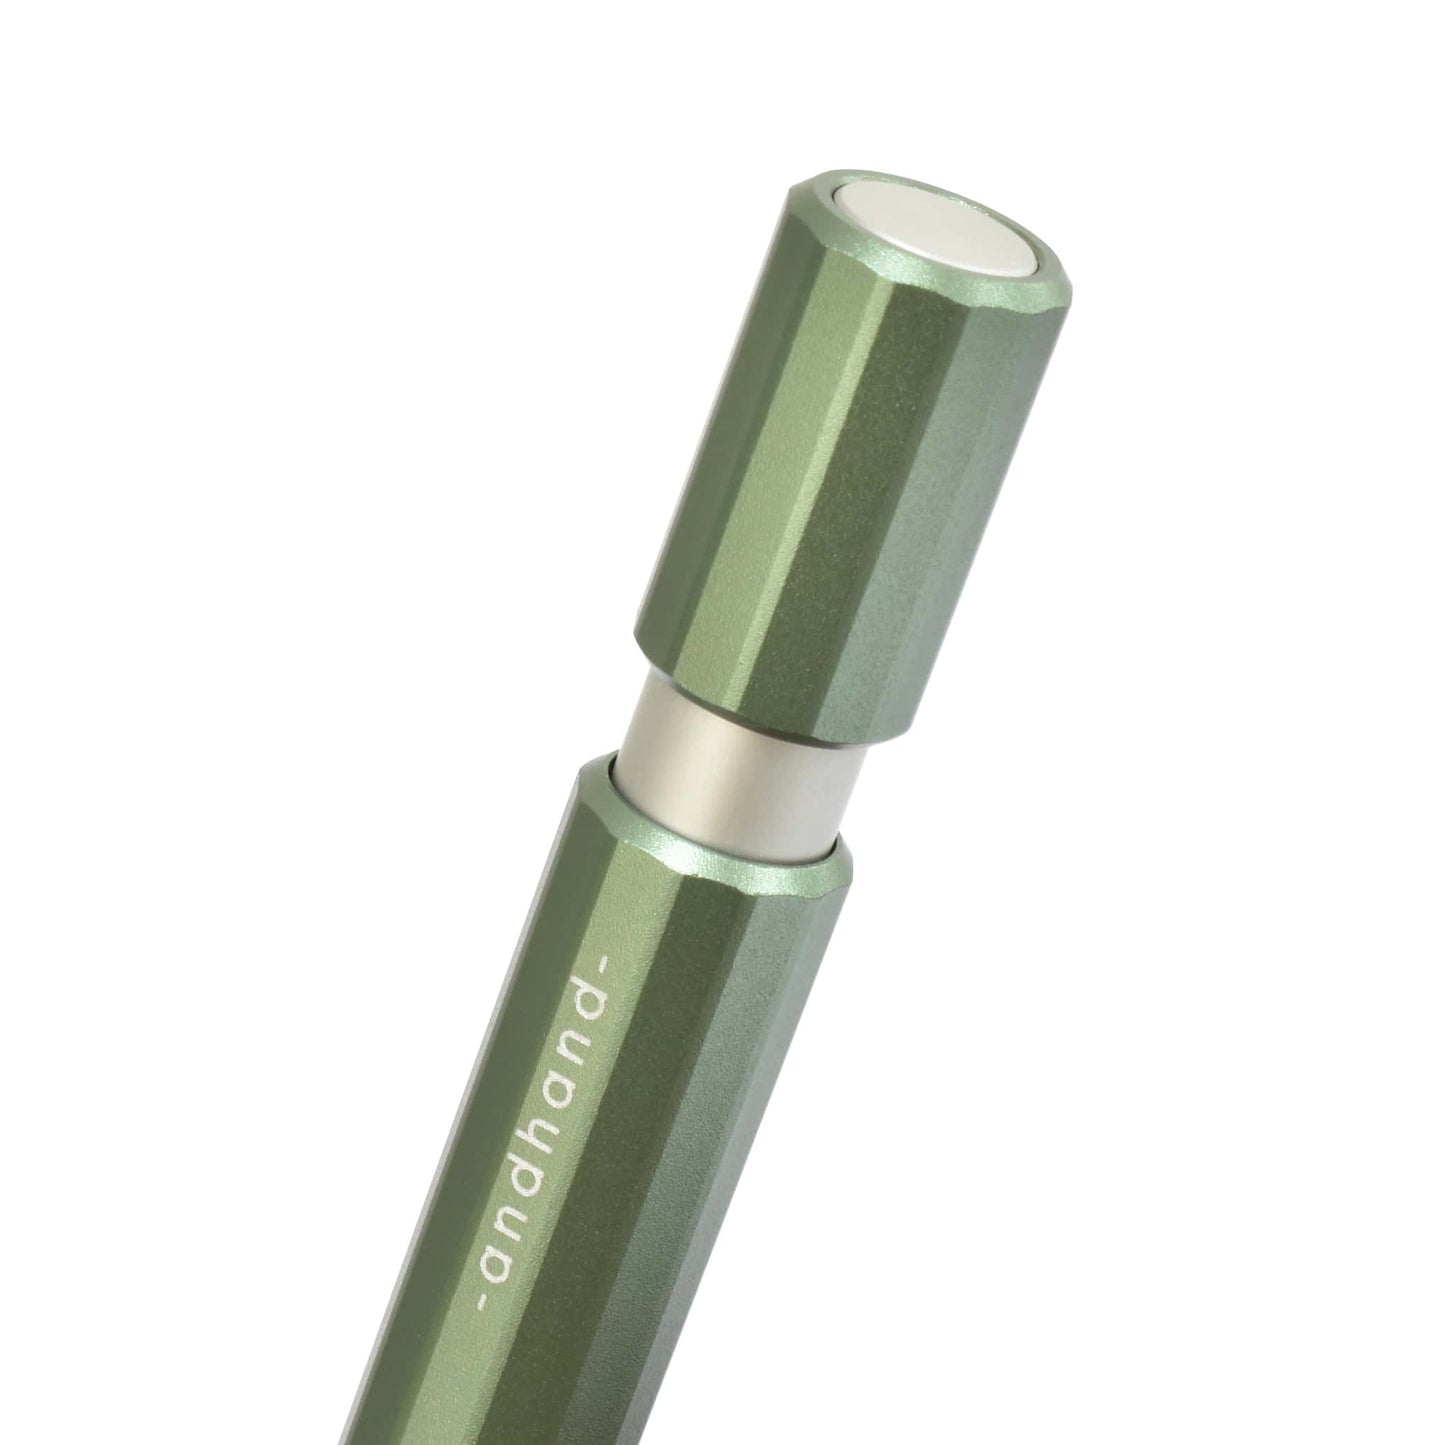 Aspect retractable pen in forest green anodized finish. A great pen for journaling, sketching or note taking. Equipped with a capless system rollerball cartridge for great ink flow.